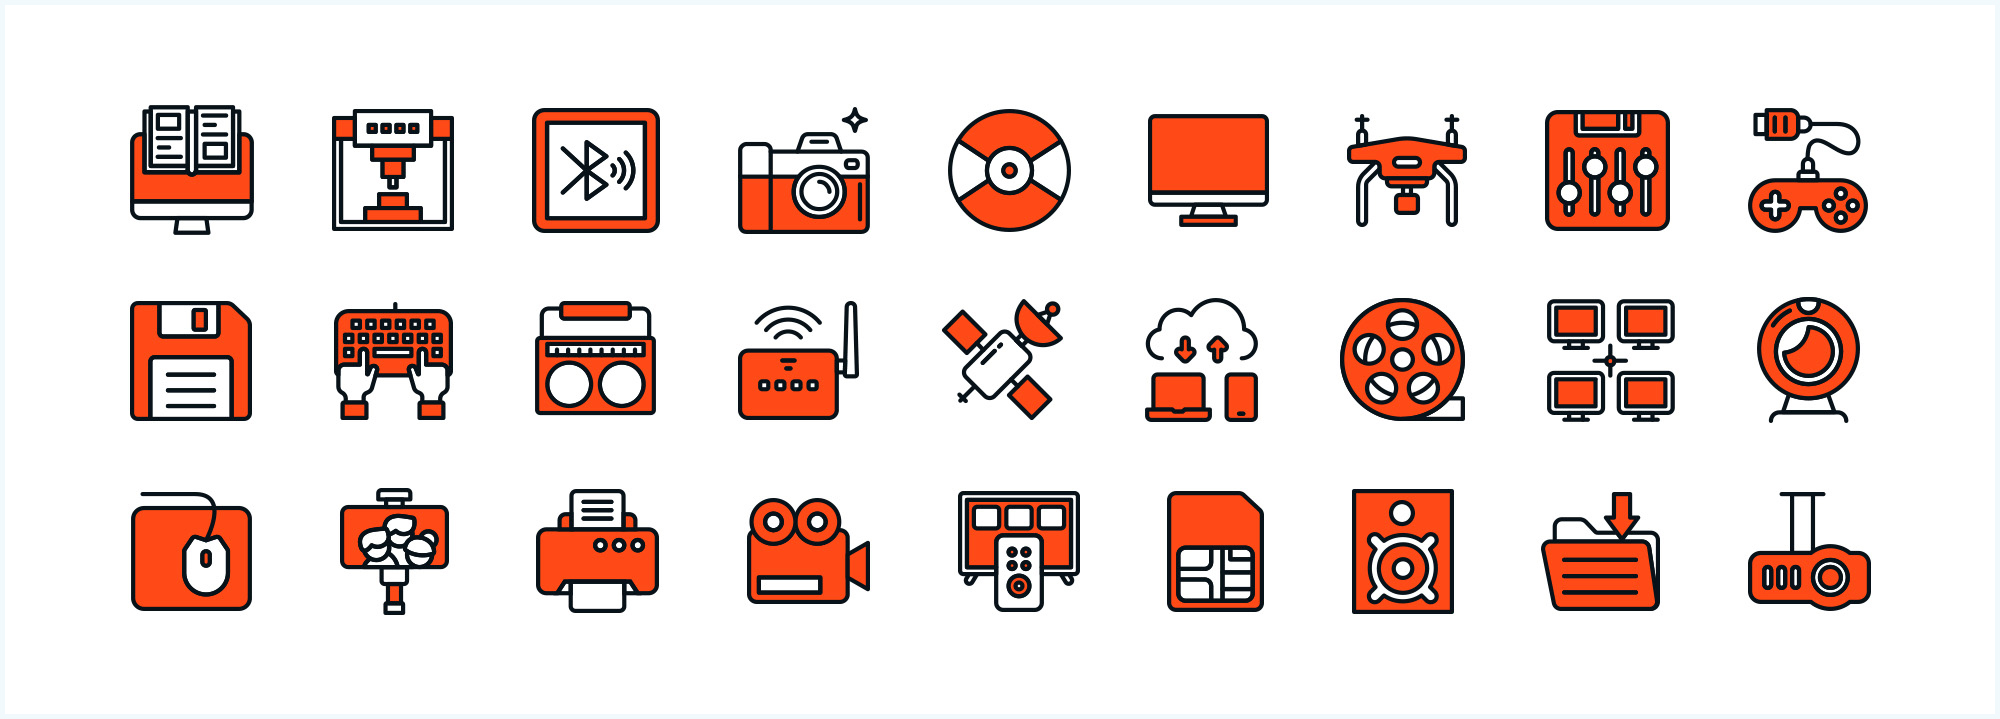 What are SVG Icons?